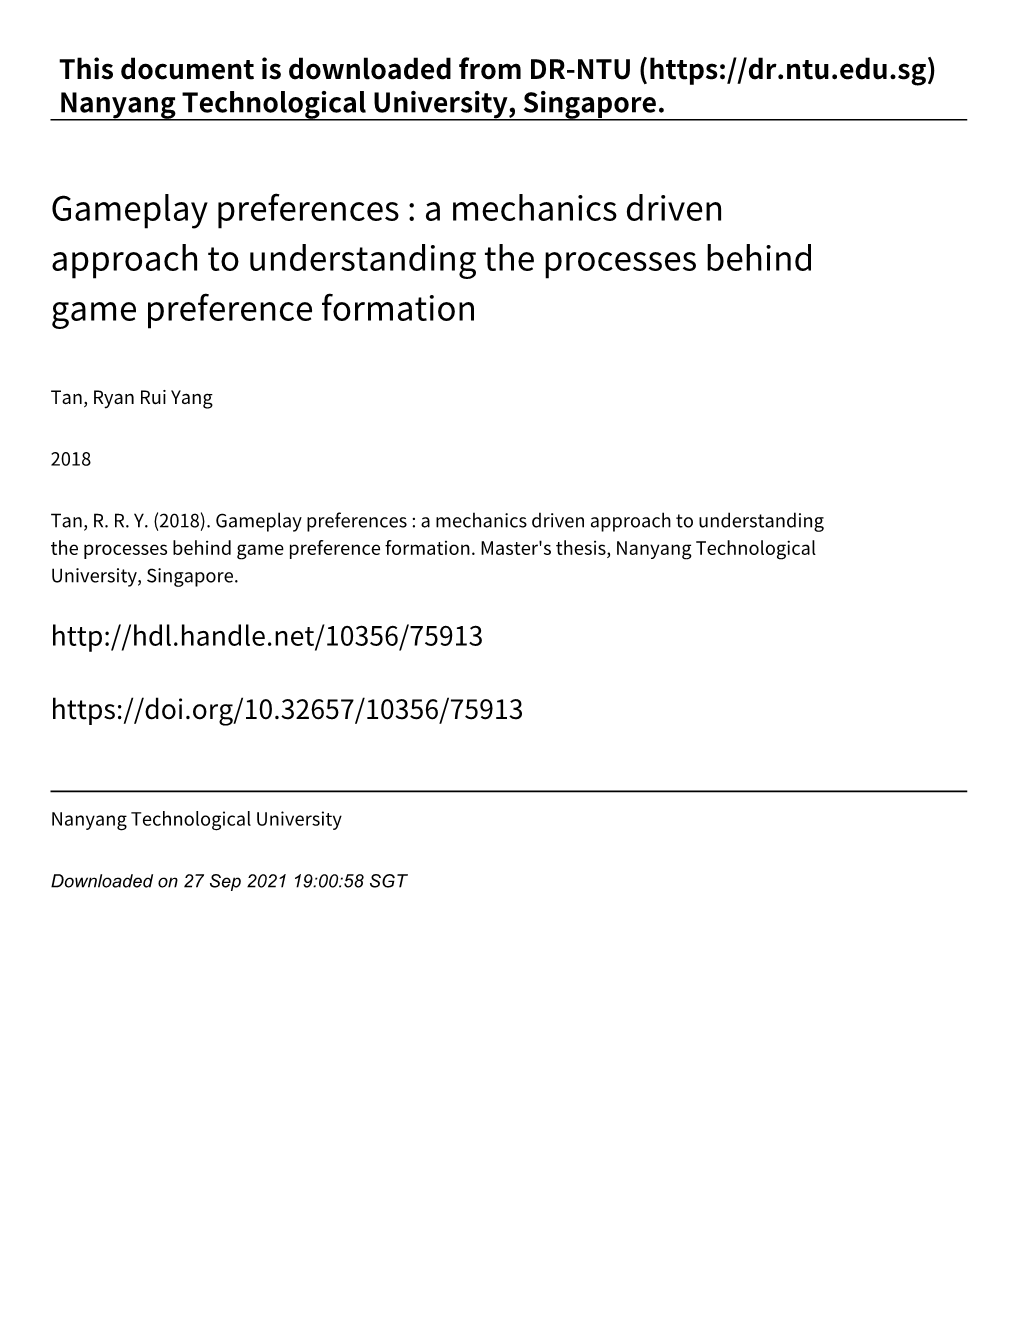 Gameplay Preferences : a Mechanics Driven Approach to Understanding the Processes Behind Game Preference Formation